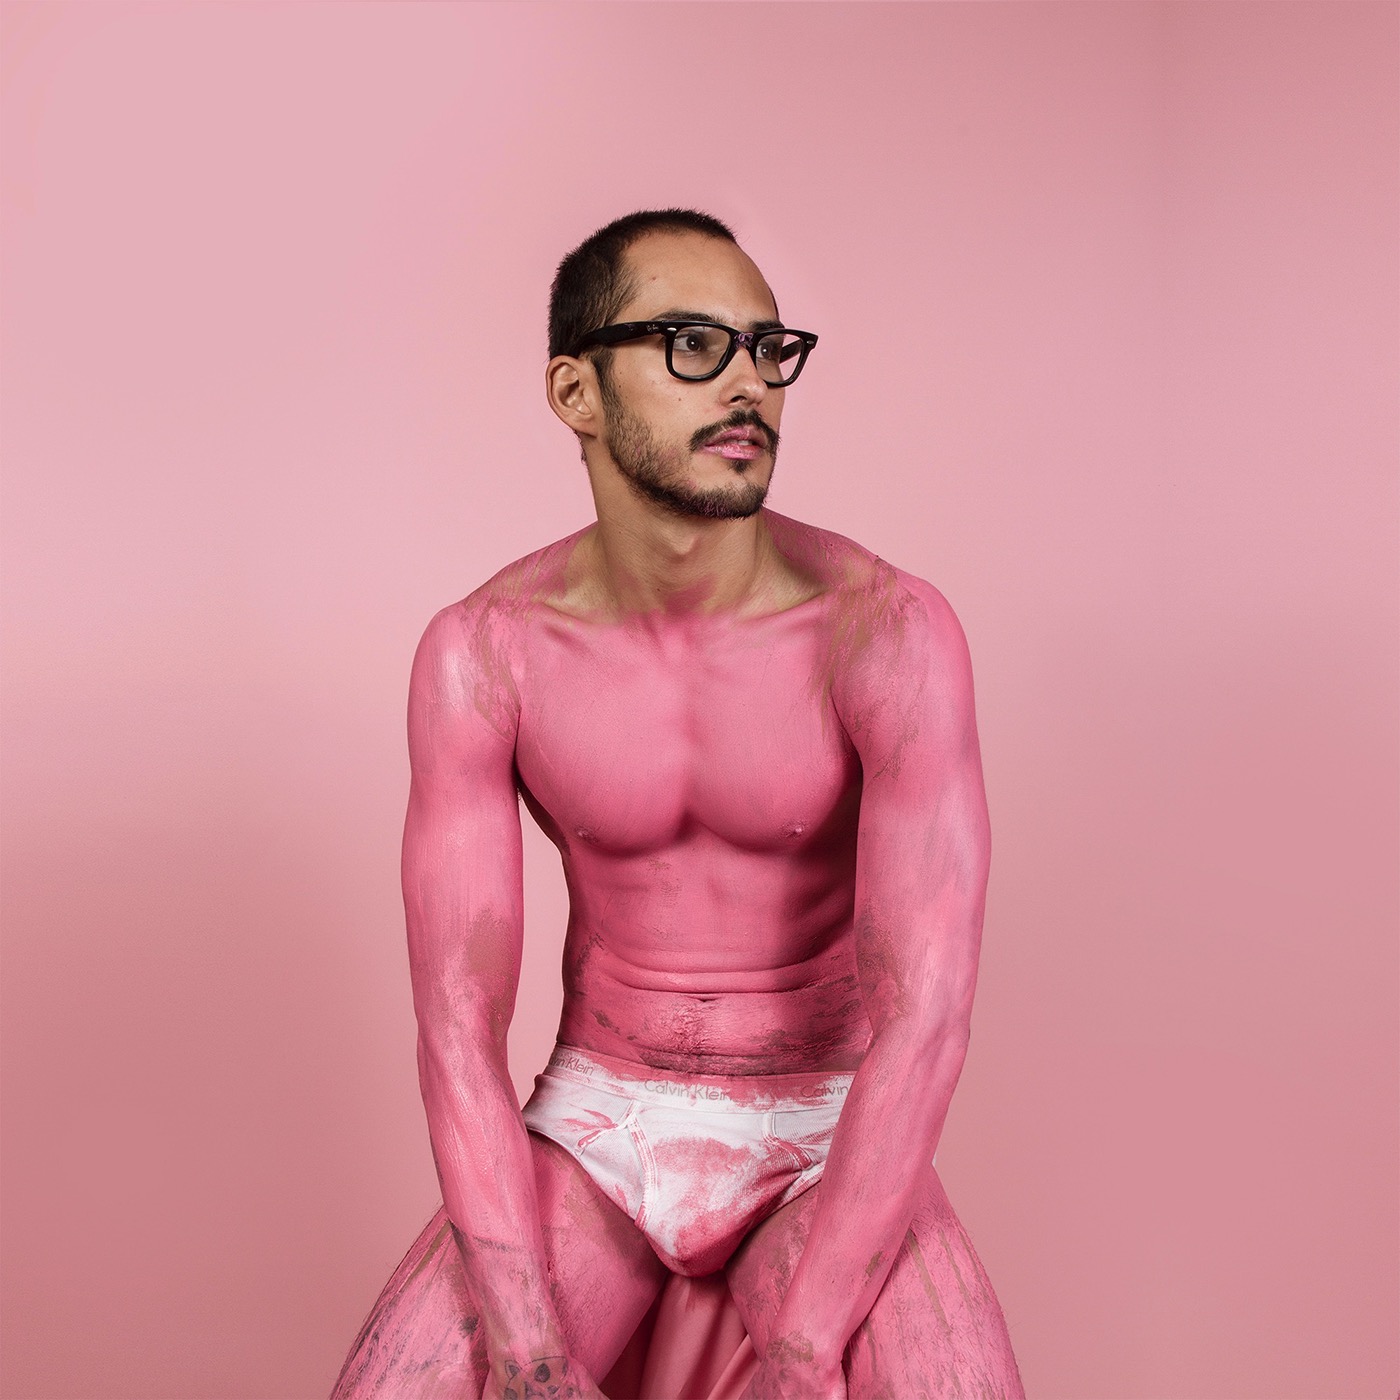 painted men colorful art ArtDirection BODYPAINT colorful gay